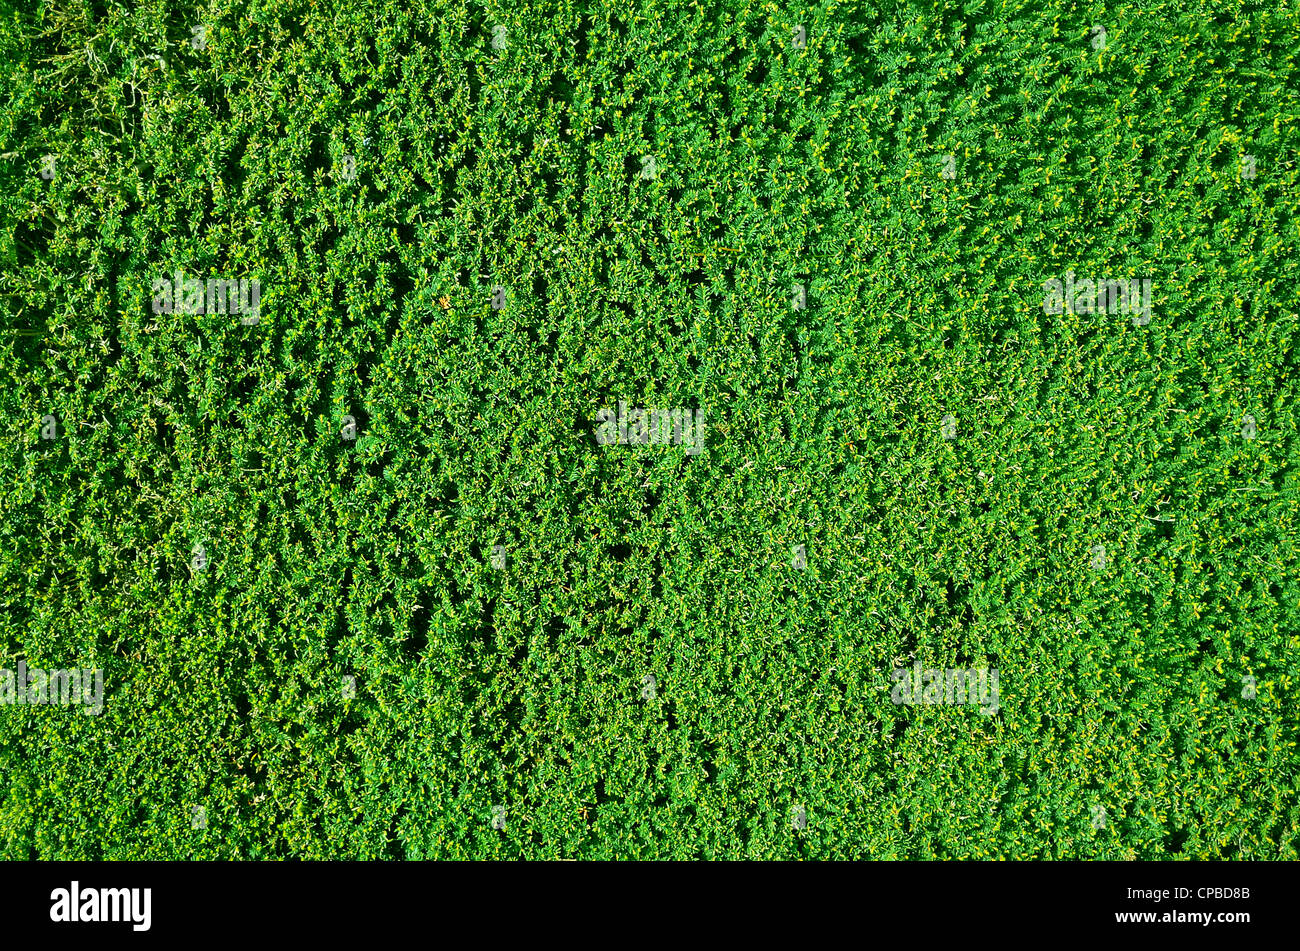 Tightly cropped border hedge texture or background Stock Photo